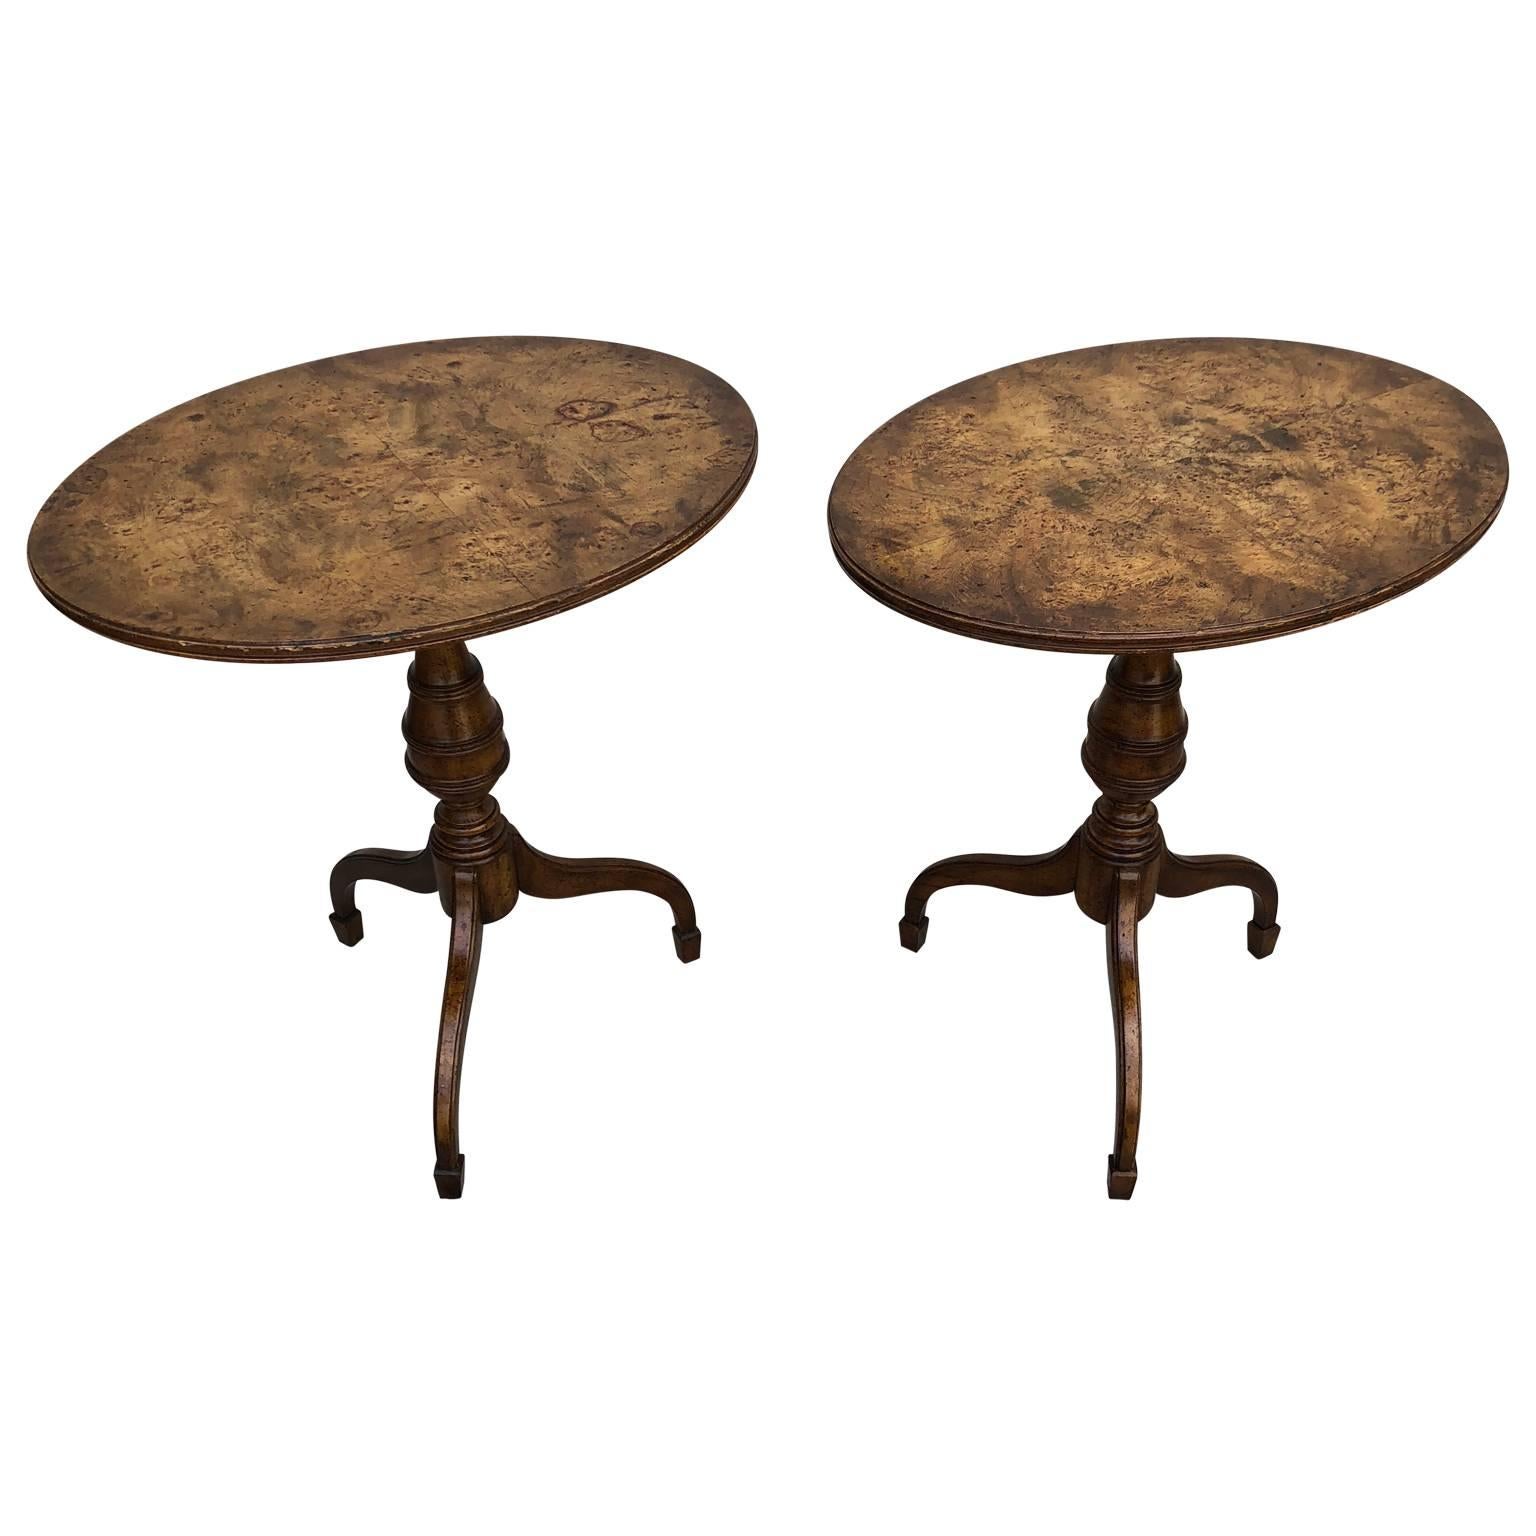 20th Century Pair of Mid-Century Modern Burl Wood Lamp or Side Tables by Weiman